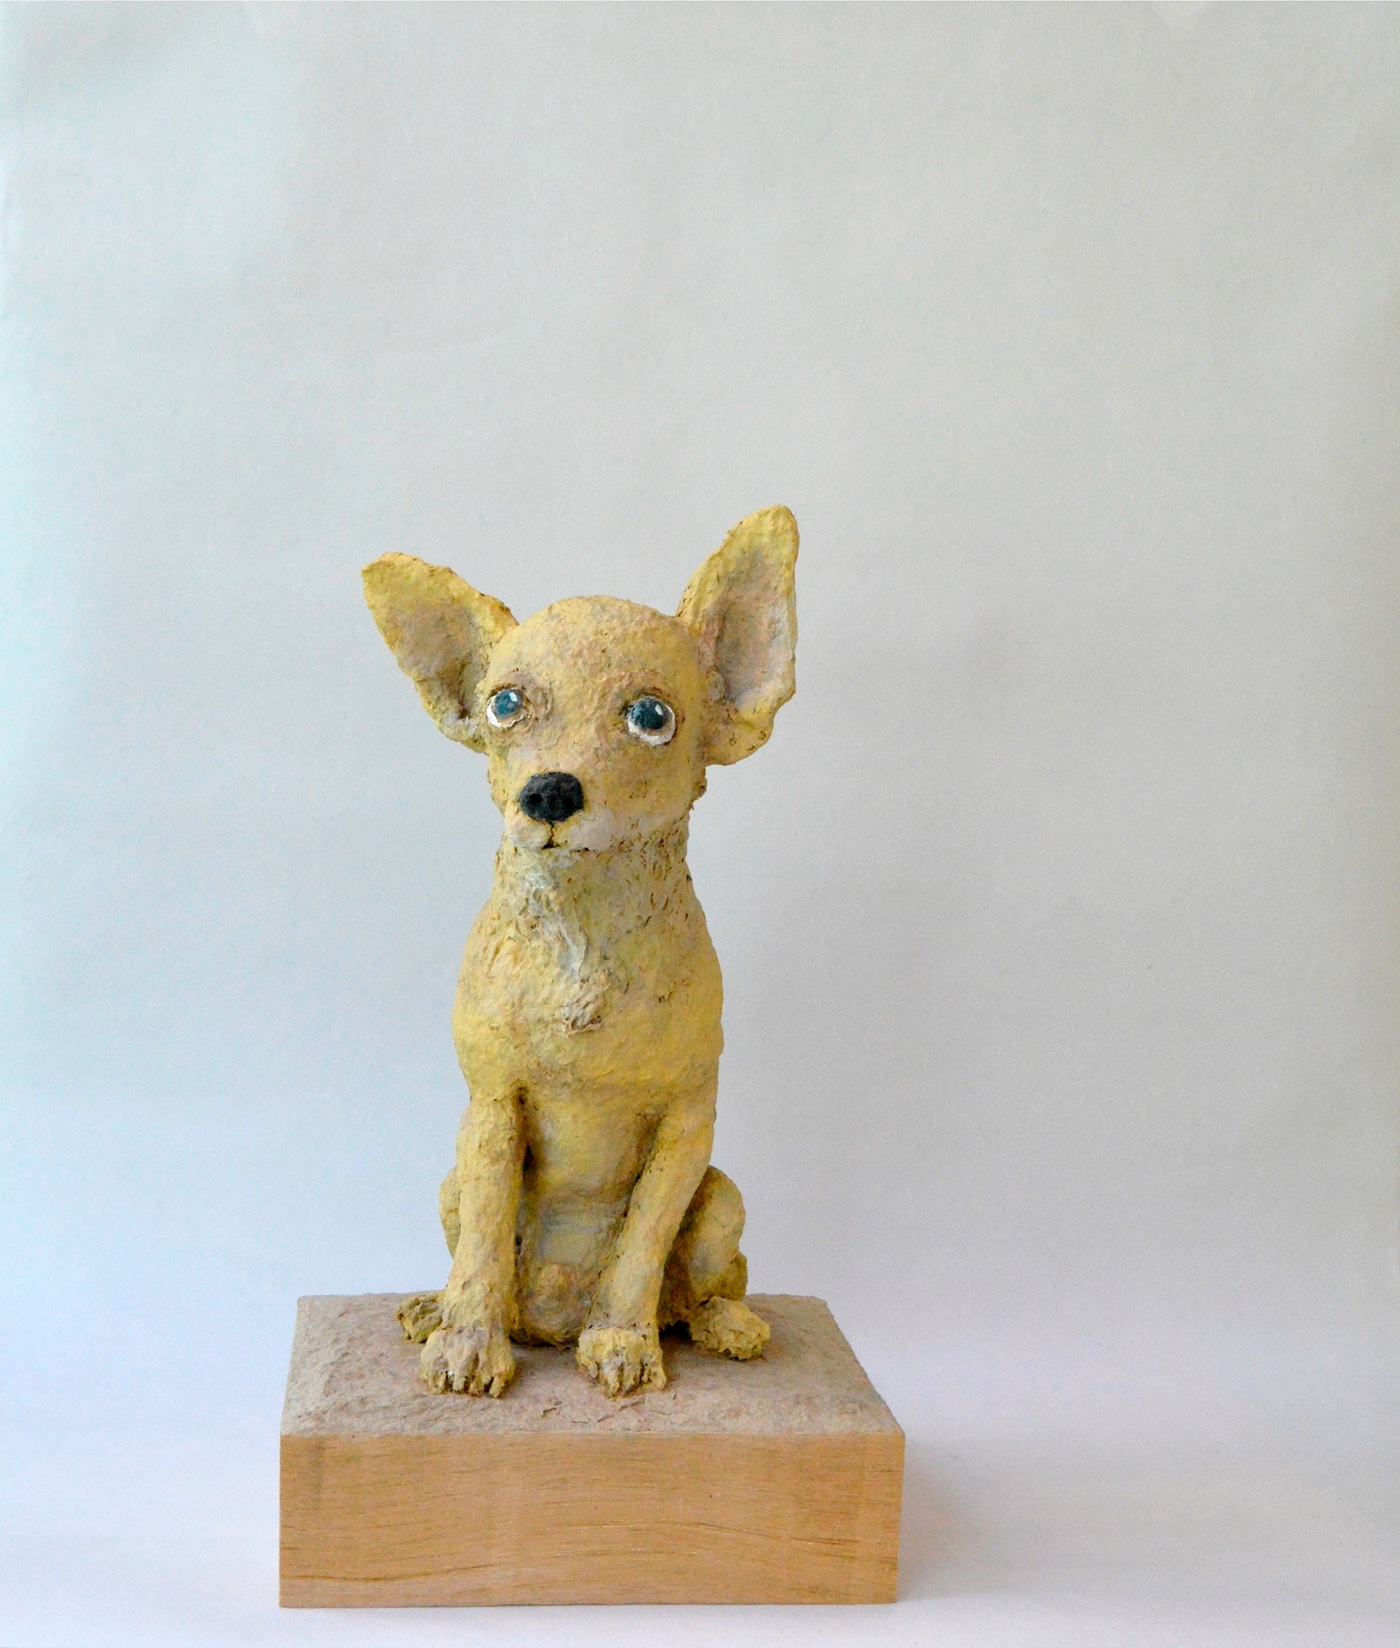 sculpture papers animals Nature paper mache RECYCLED Cardboard Paper recycled art